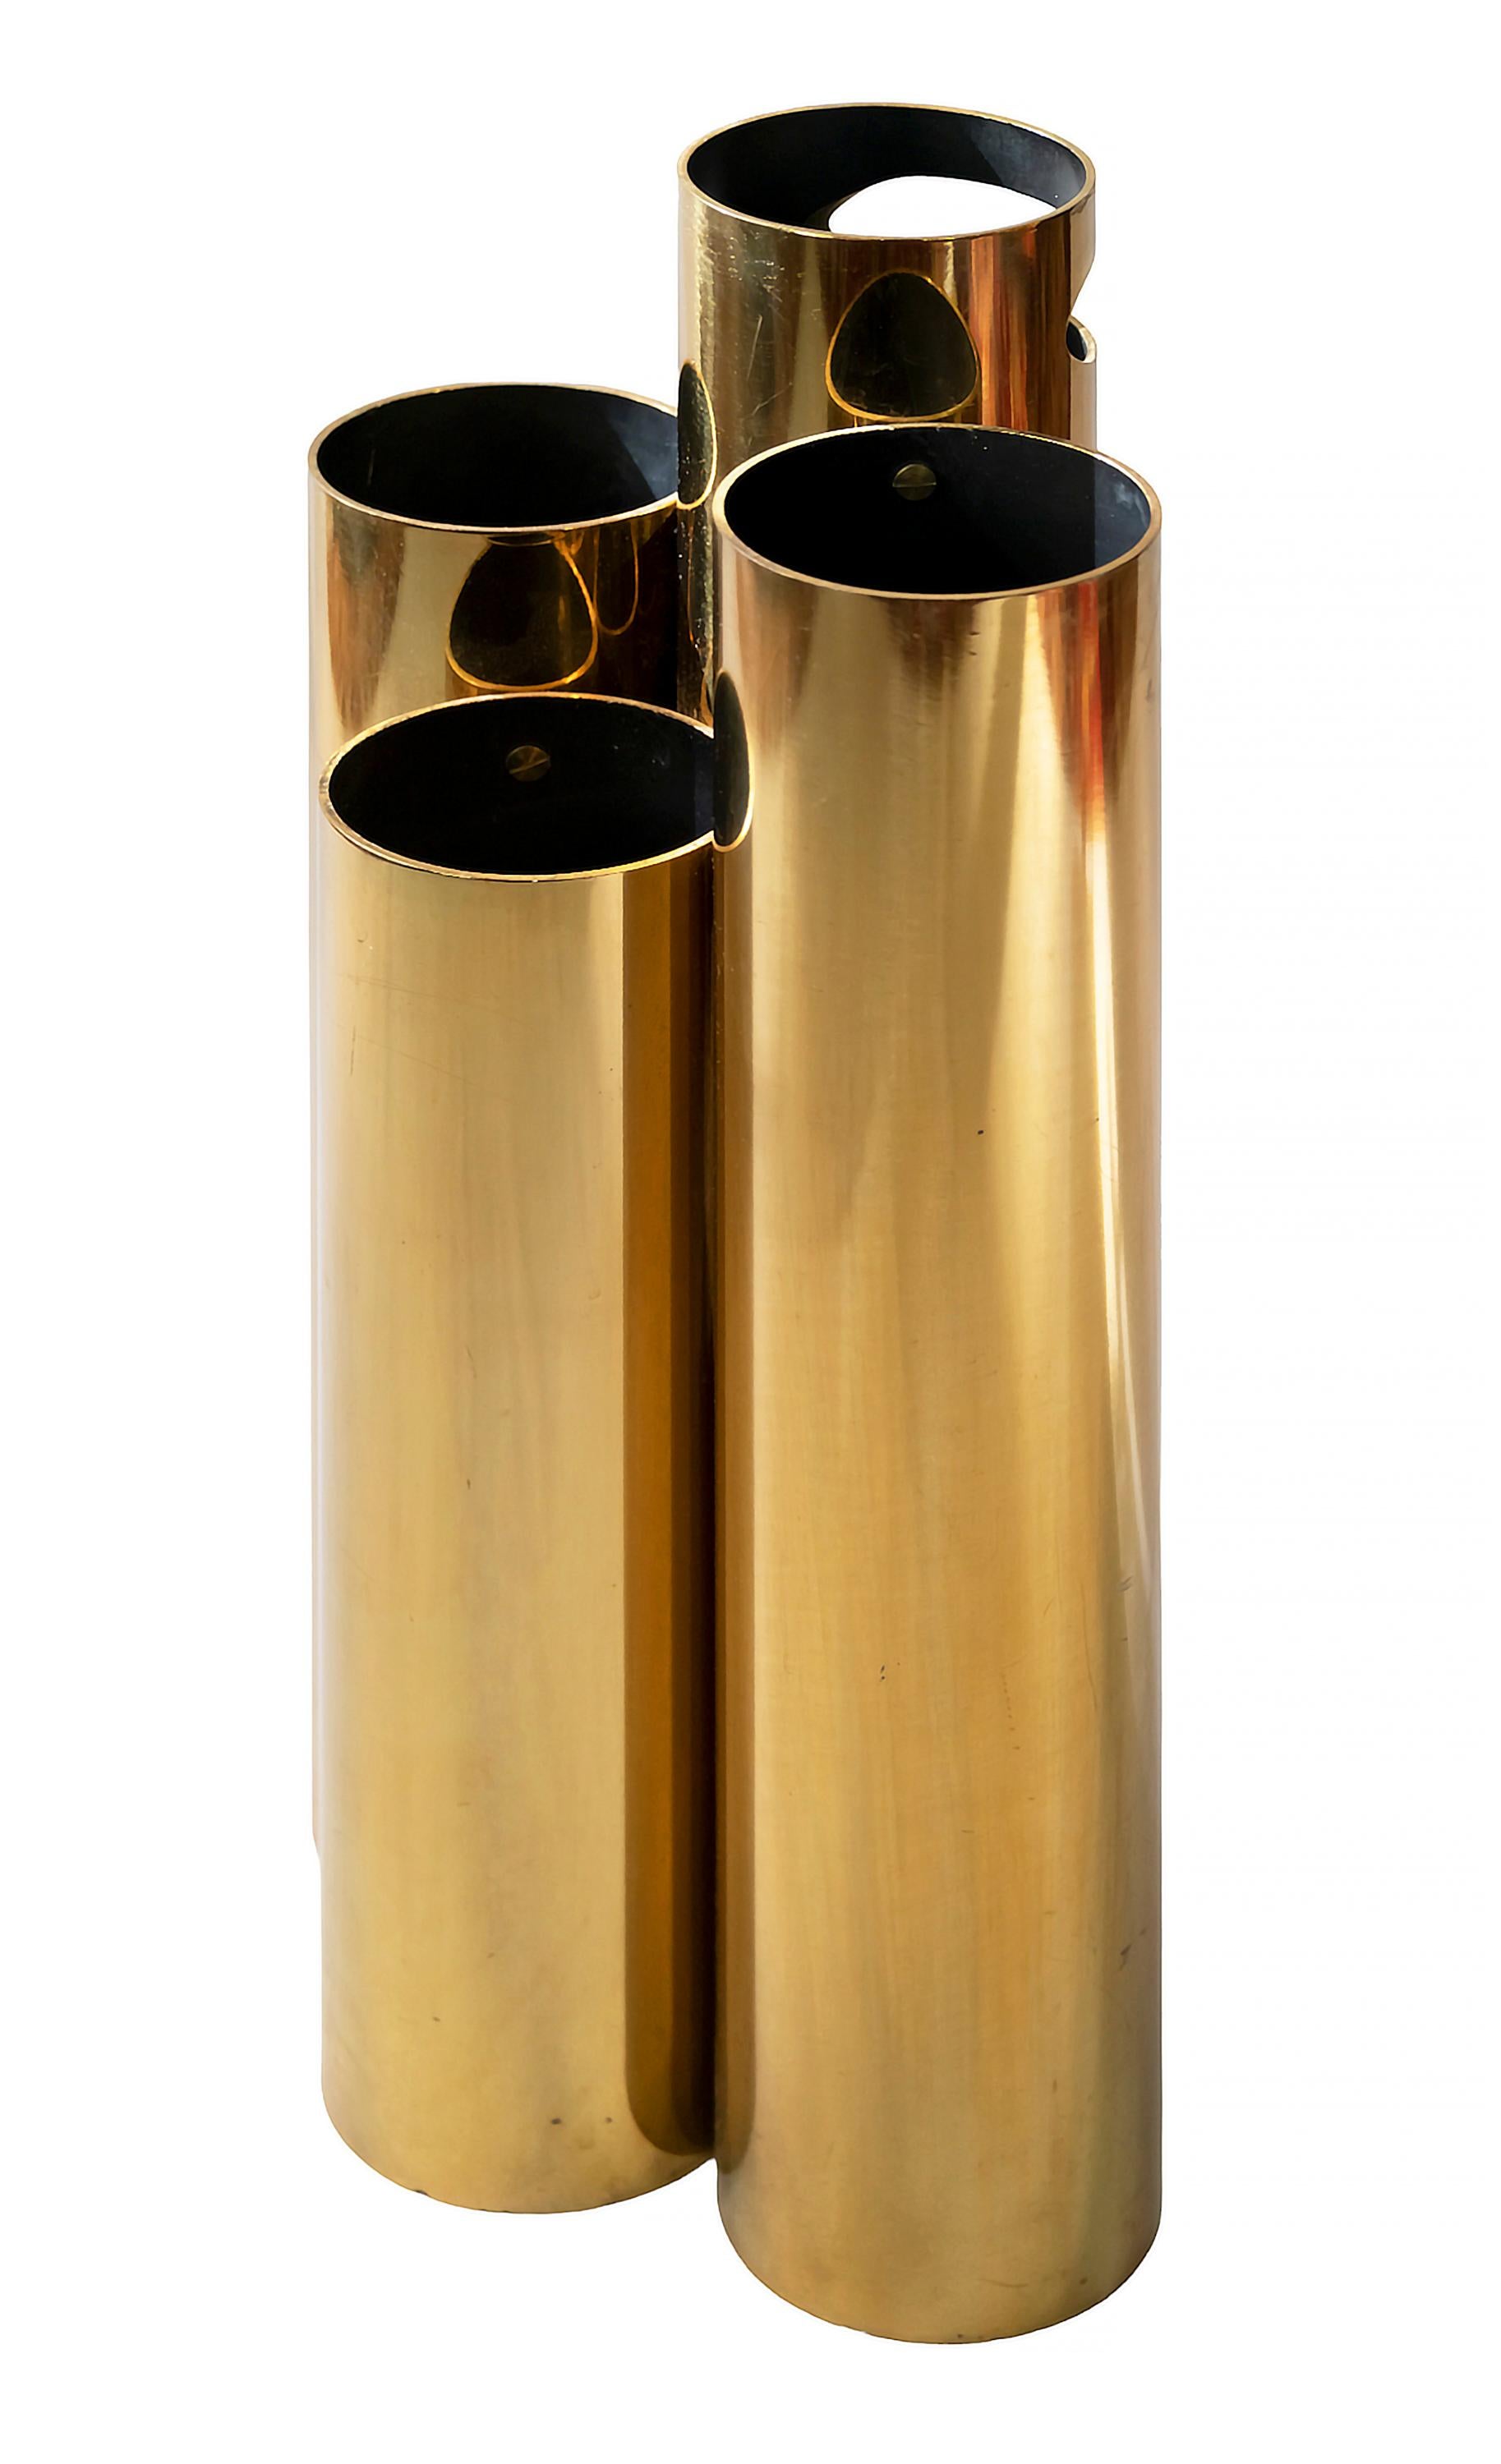 Italian midcentury brass umbrella stand created as a set of four cylinder tubes that are of different height and connected together. The highest tube is with hole cut out as a handle.